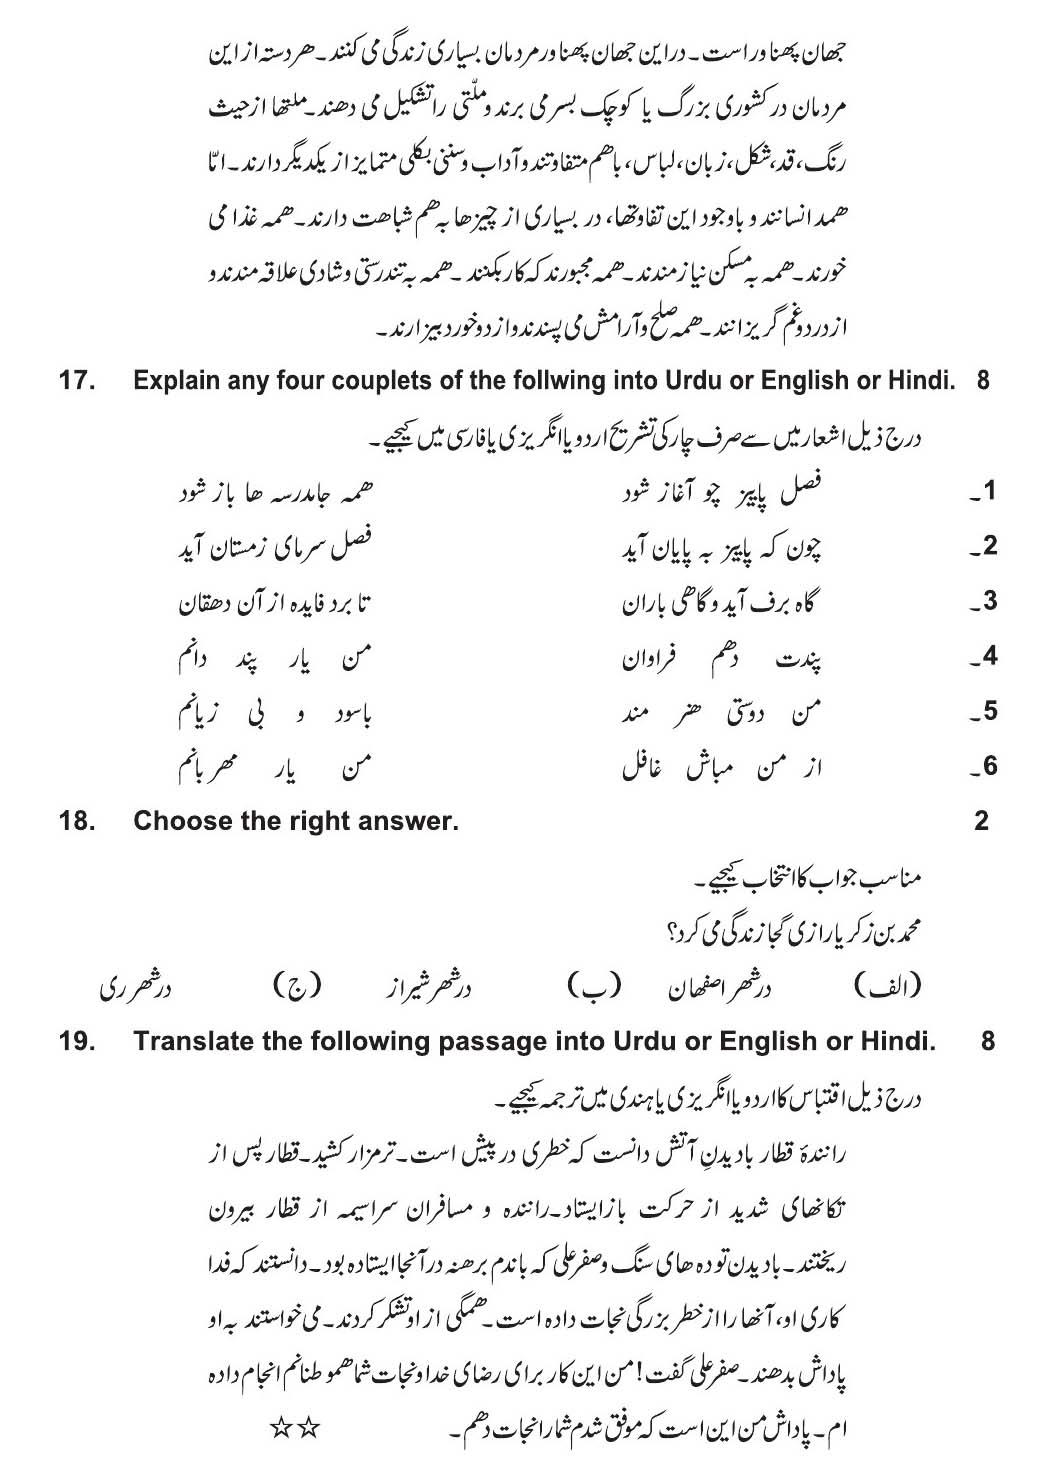 Persian CBSE Class X Sample Question Paper 2018-19 - Image 4